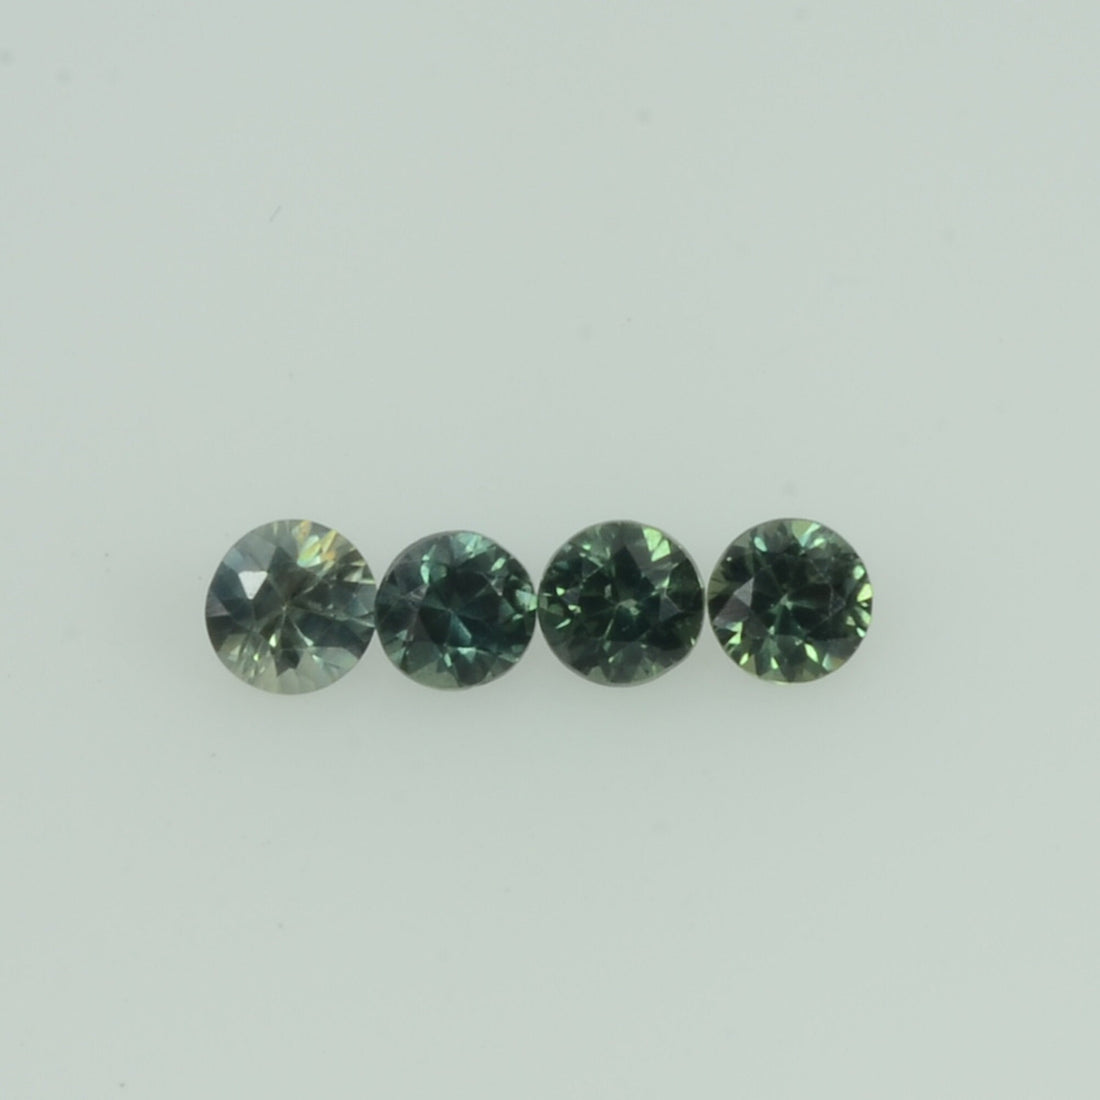 2.0-3.5 mm Natural Teal Green Sapphire Loose Gemstone Round Diamond Cut Vs Quality Color